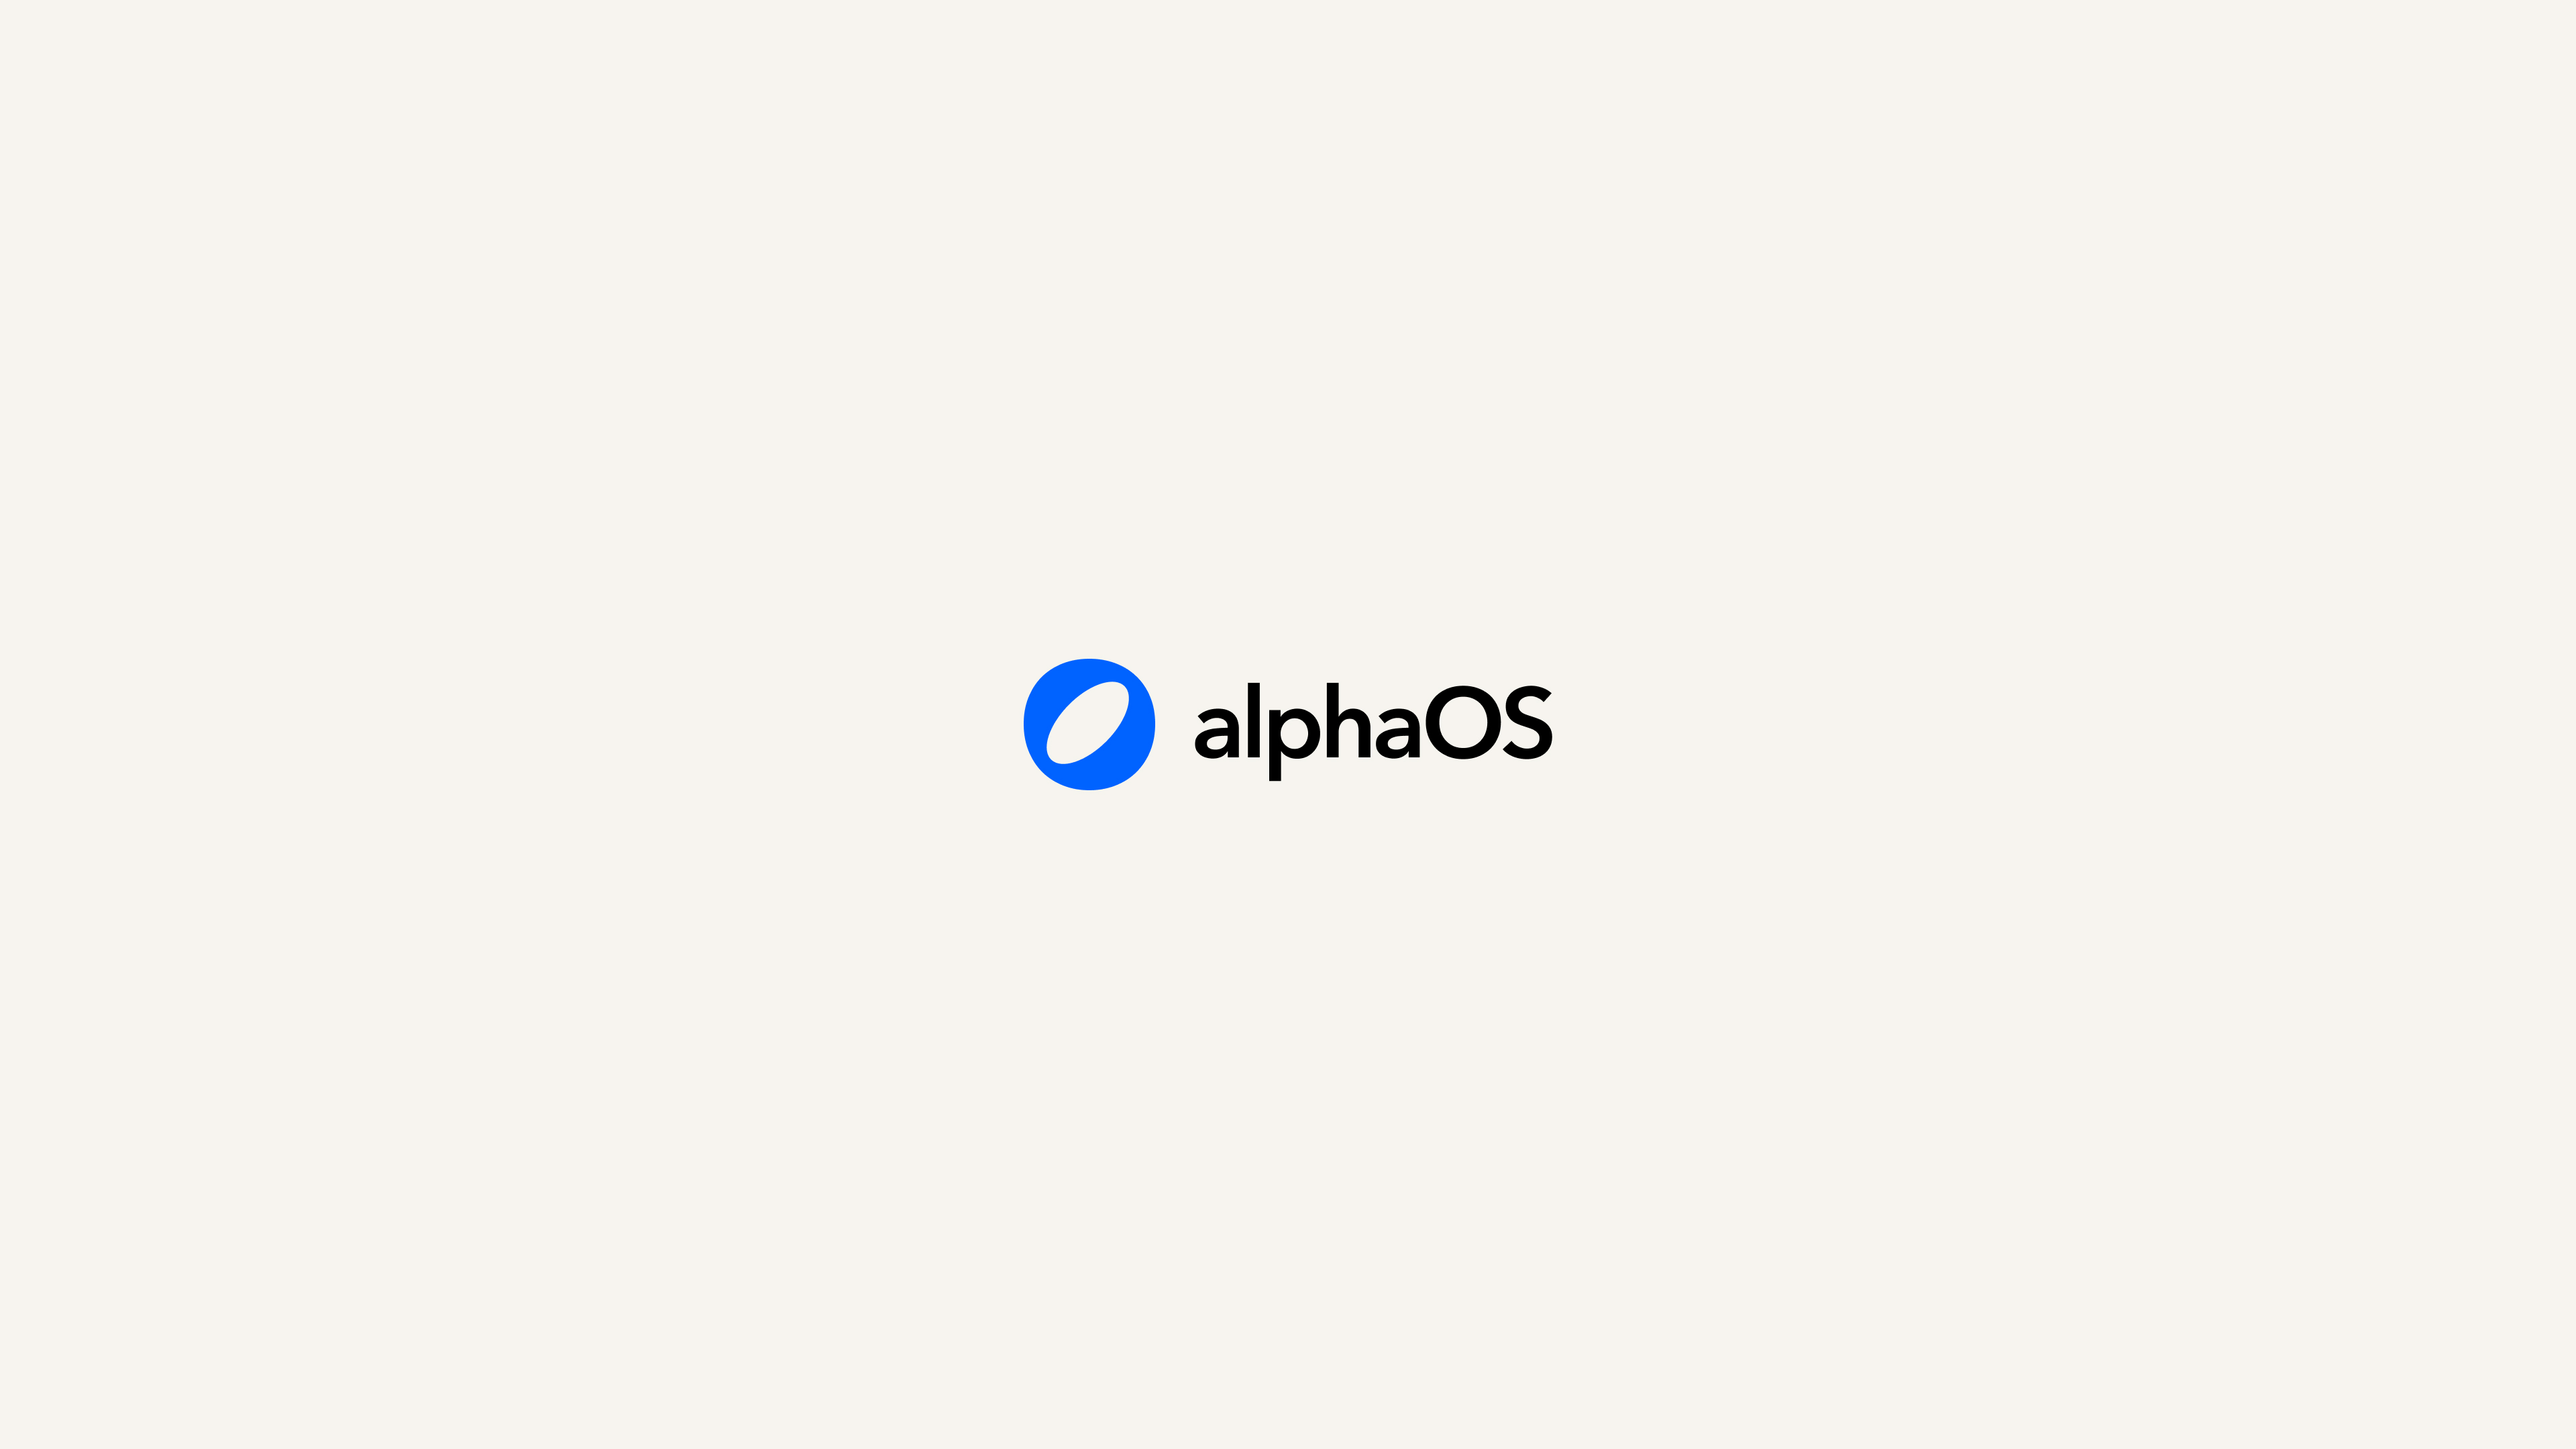 How alphaOS thinks about using AI